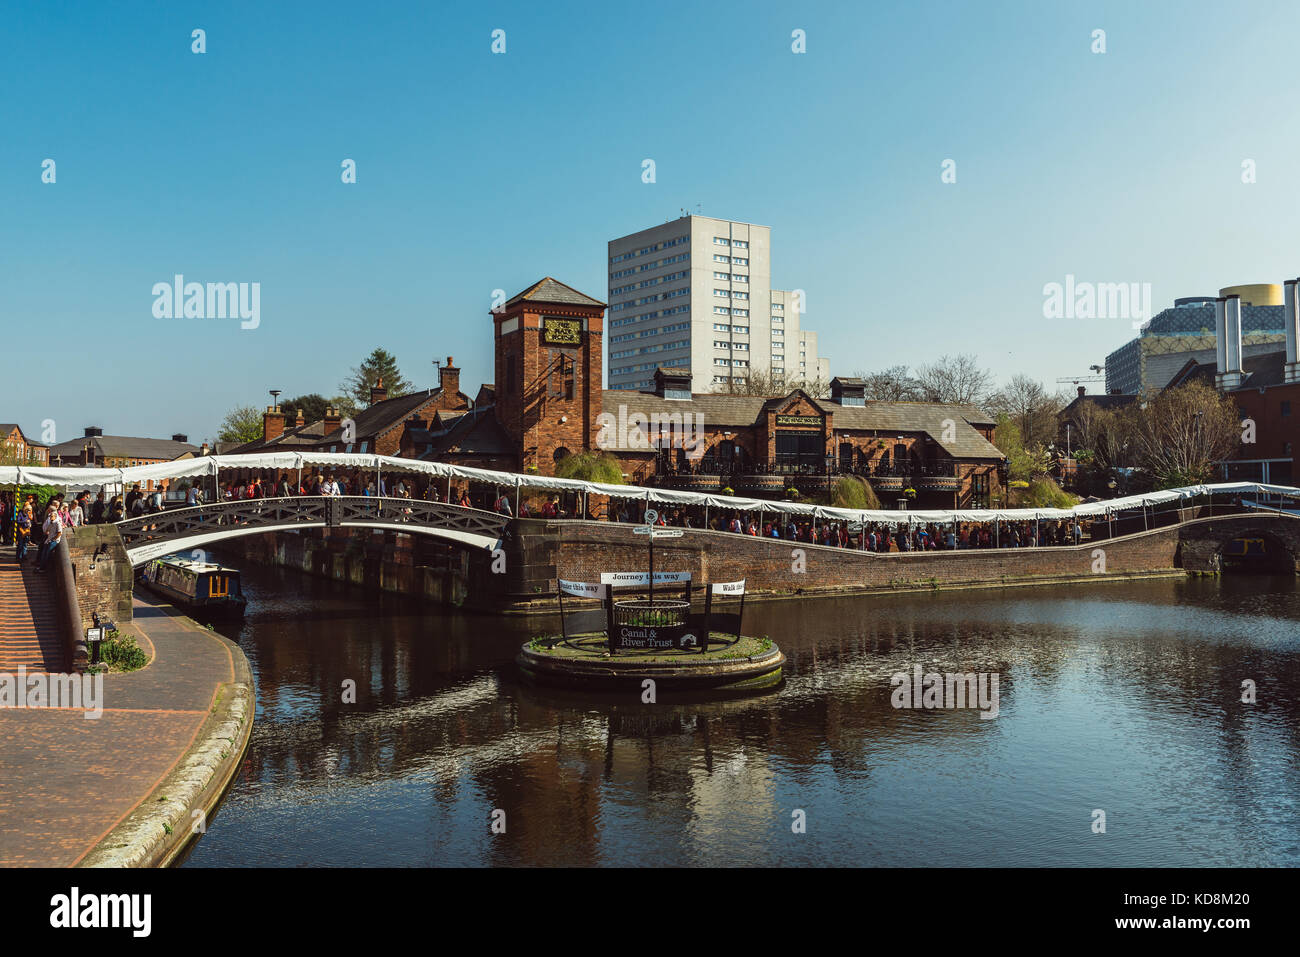 A roundabout on a canal in Birmingham overlooking a traditonal British pub Stock Photo